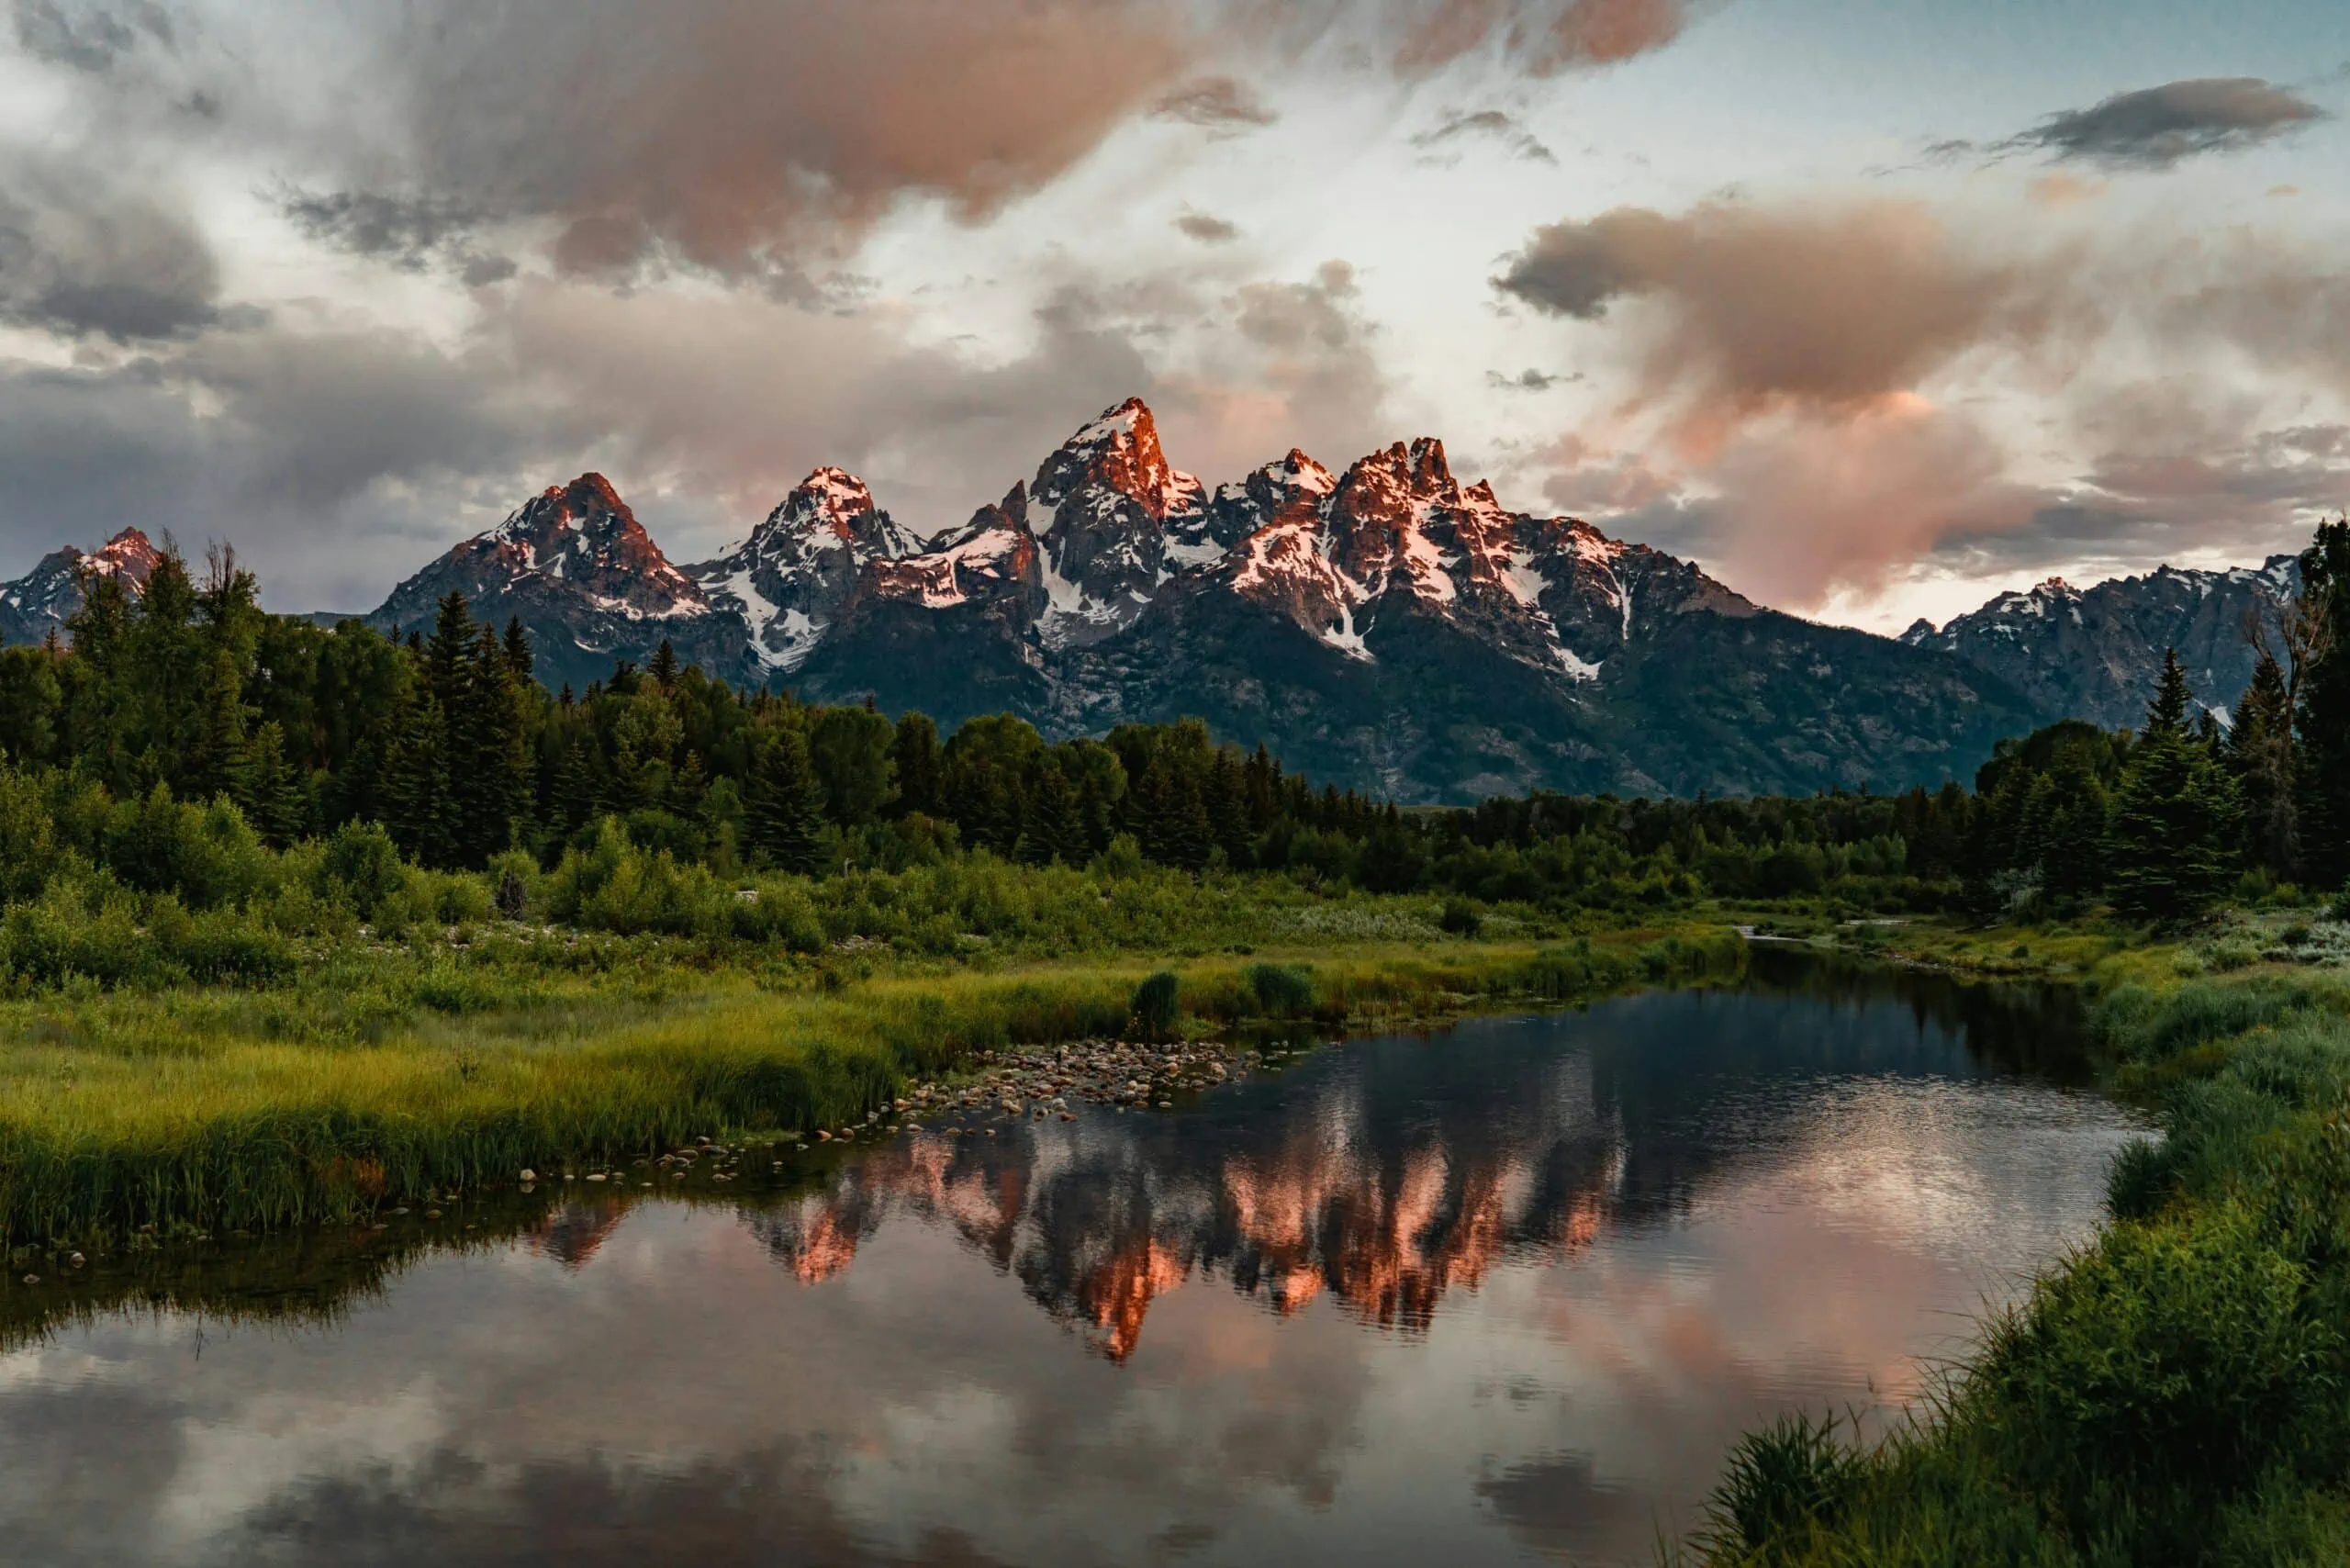 A view of the mountains at sunset in Grand Tetons National Park.